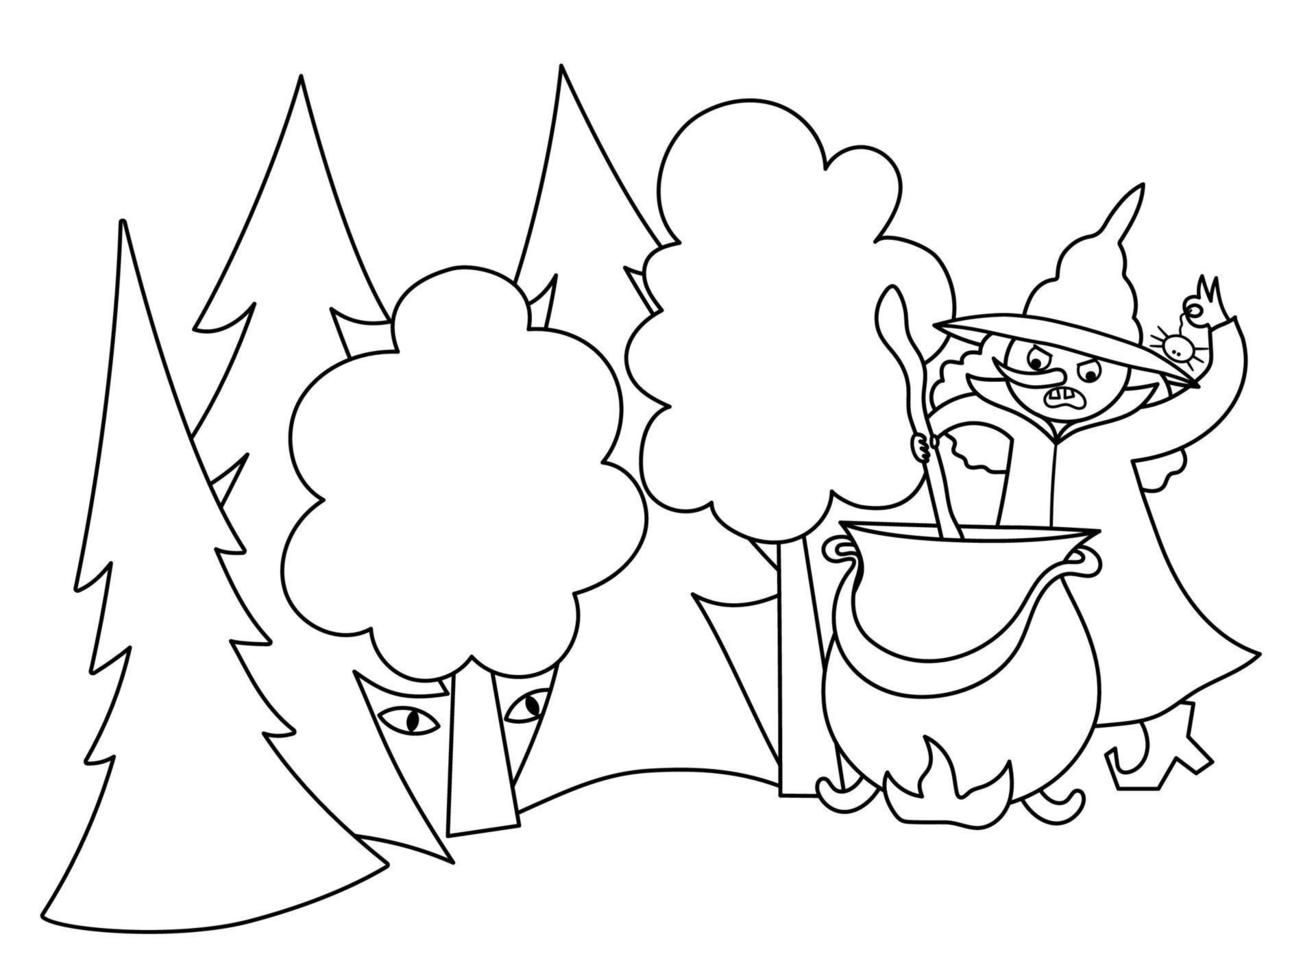 Fairy tale black and white vector magic forest illustration with witch, preparing potion in cauldron. Fairytale or Halloween fantasy line scene. Cartoon magic coloring page